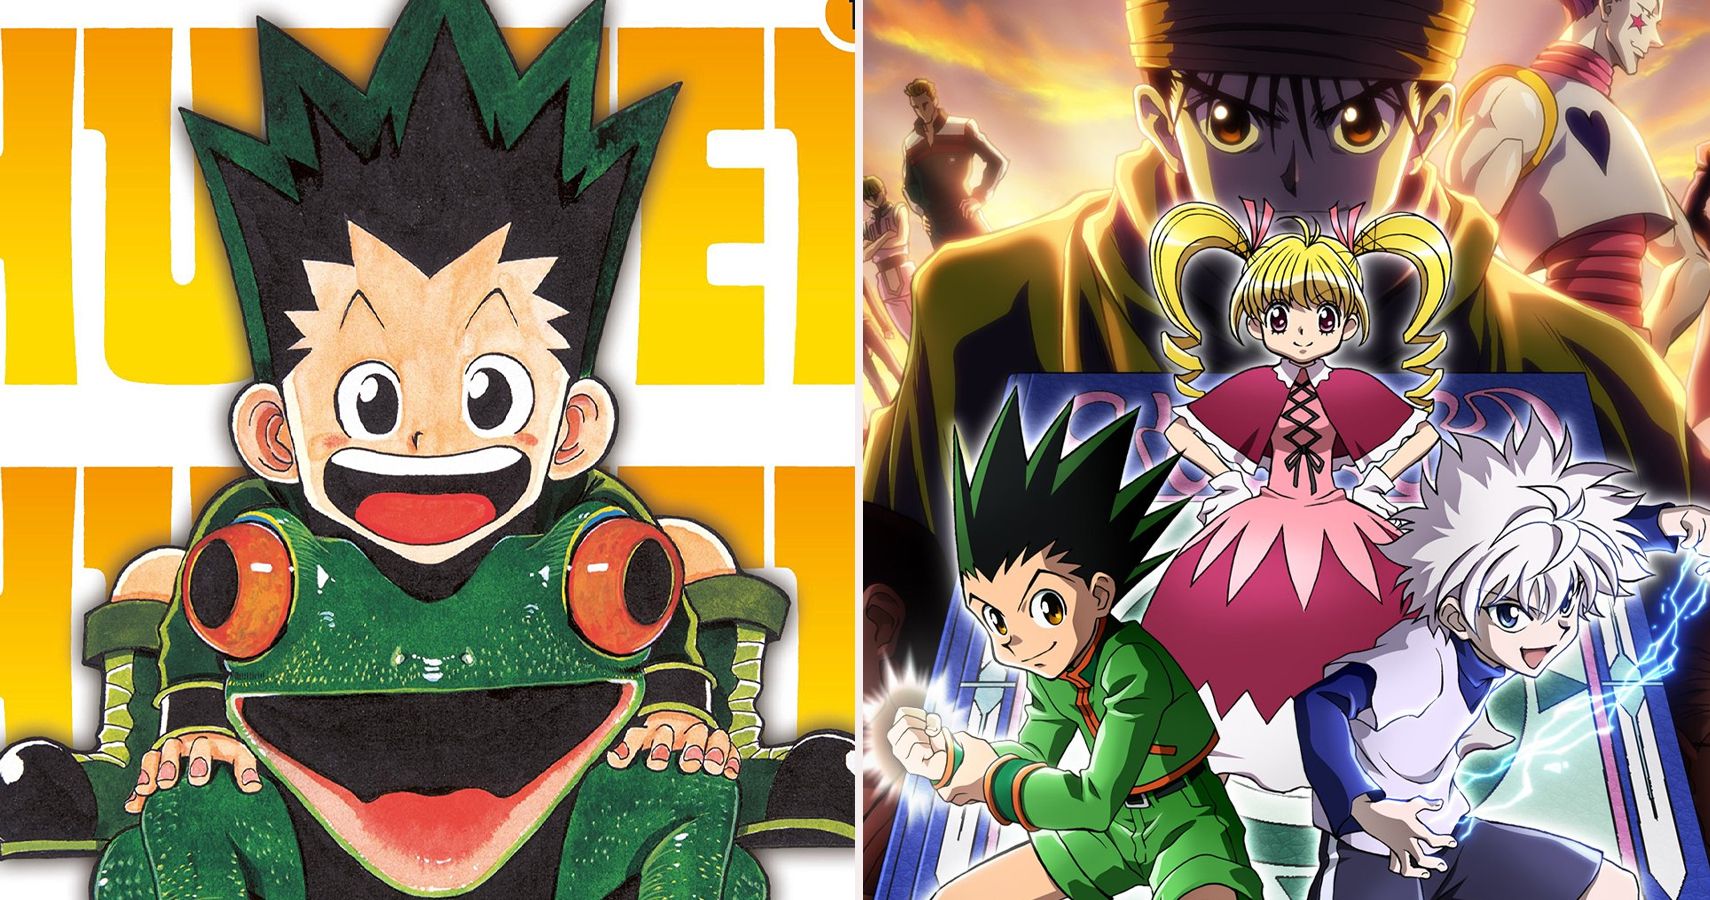 Hunter x Hunter: 5 Times It Proved To Be The Best Shonen ...